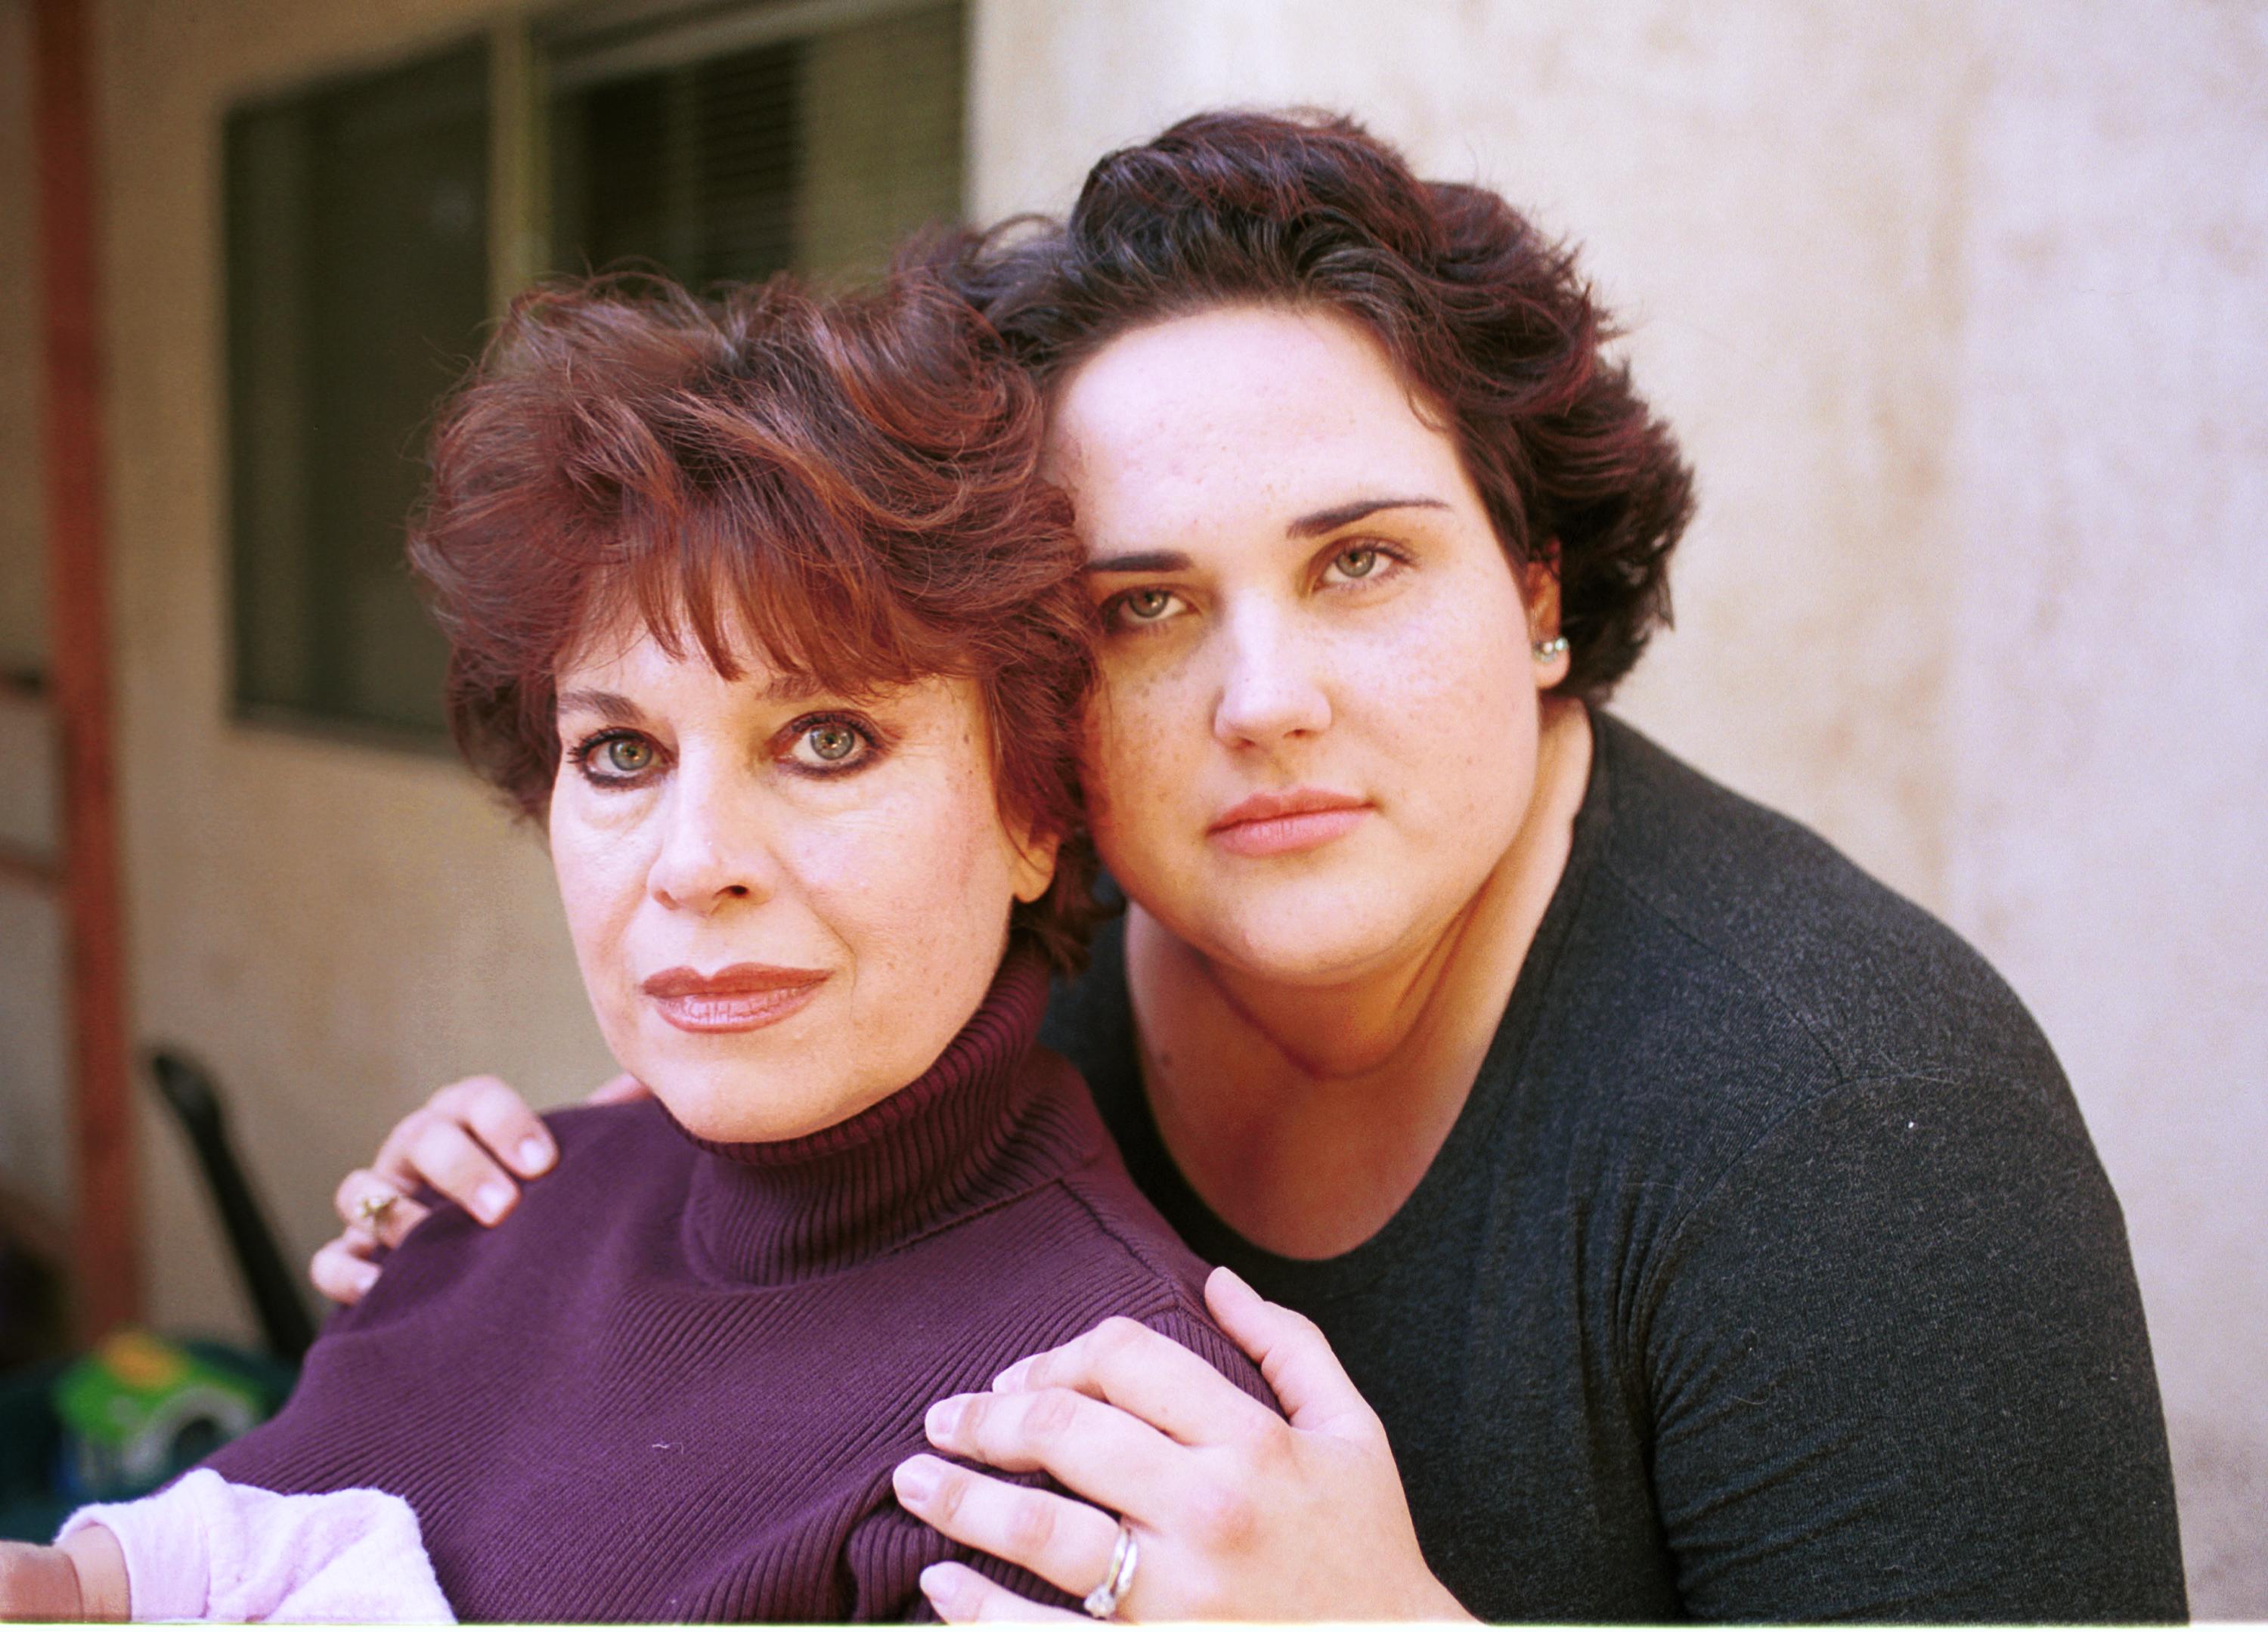 Actress Lana Wood posing with her daughter Evan Maldonado on September 28, 2000 in Thousand Oaks, California |  Source: Getty Images